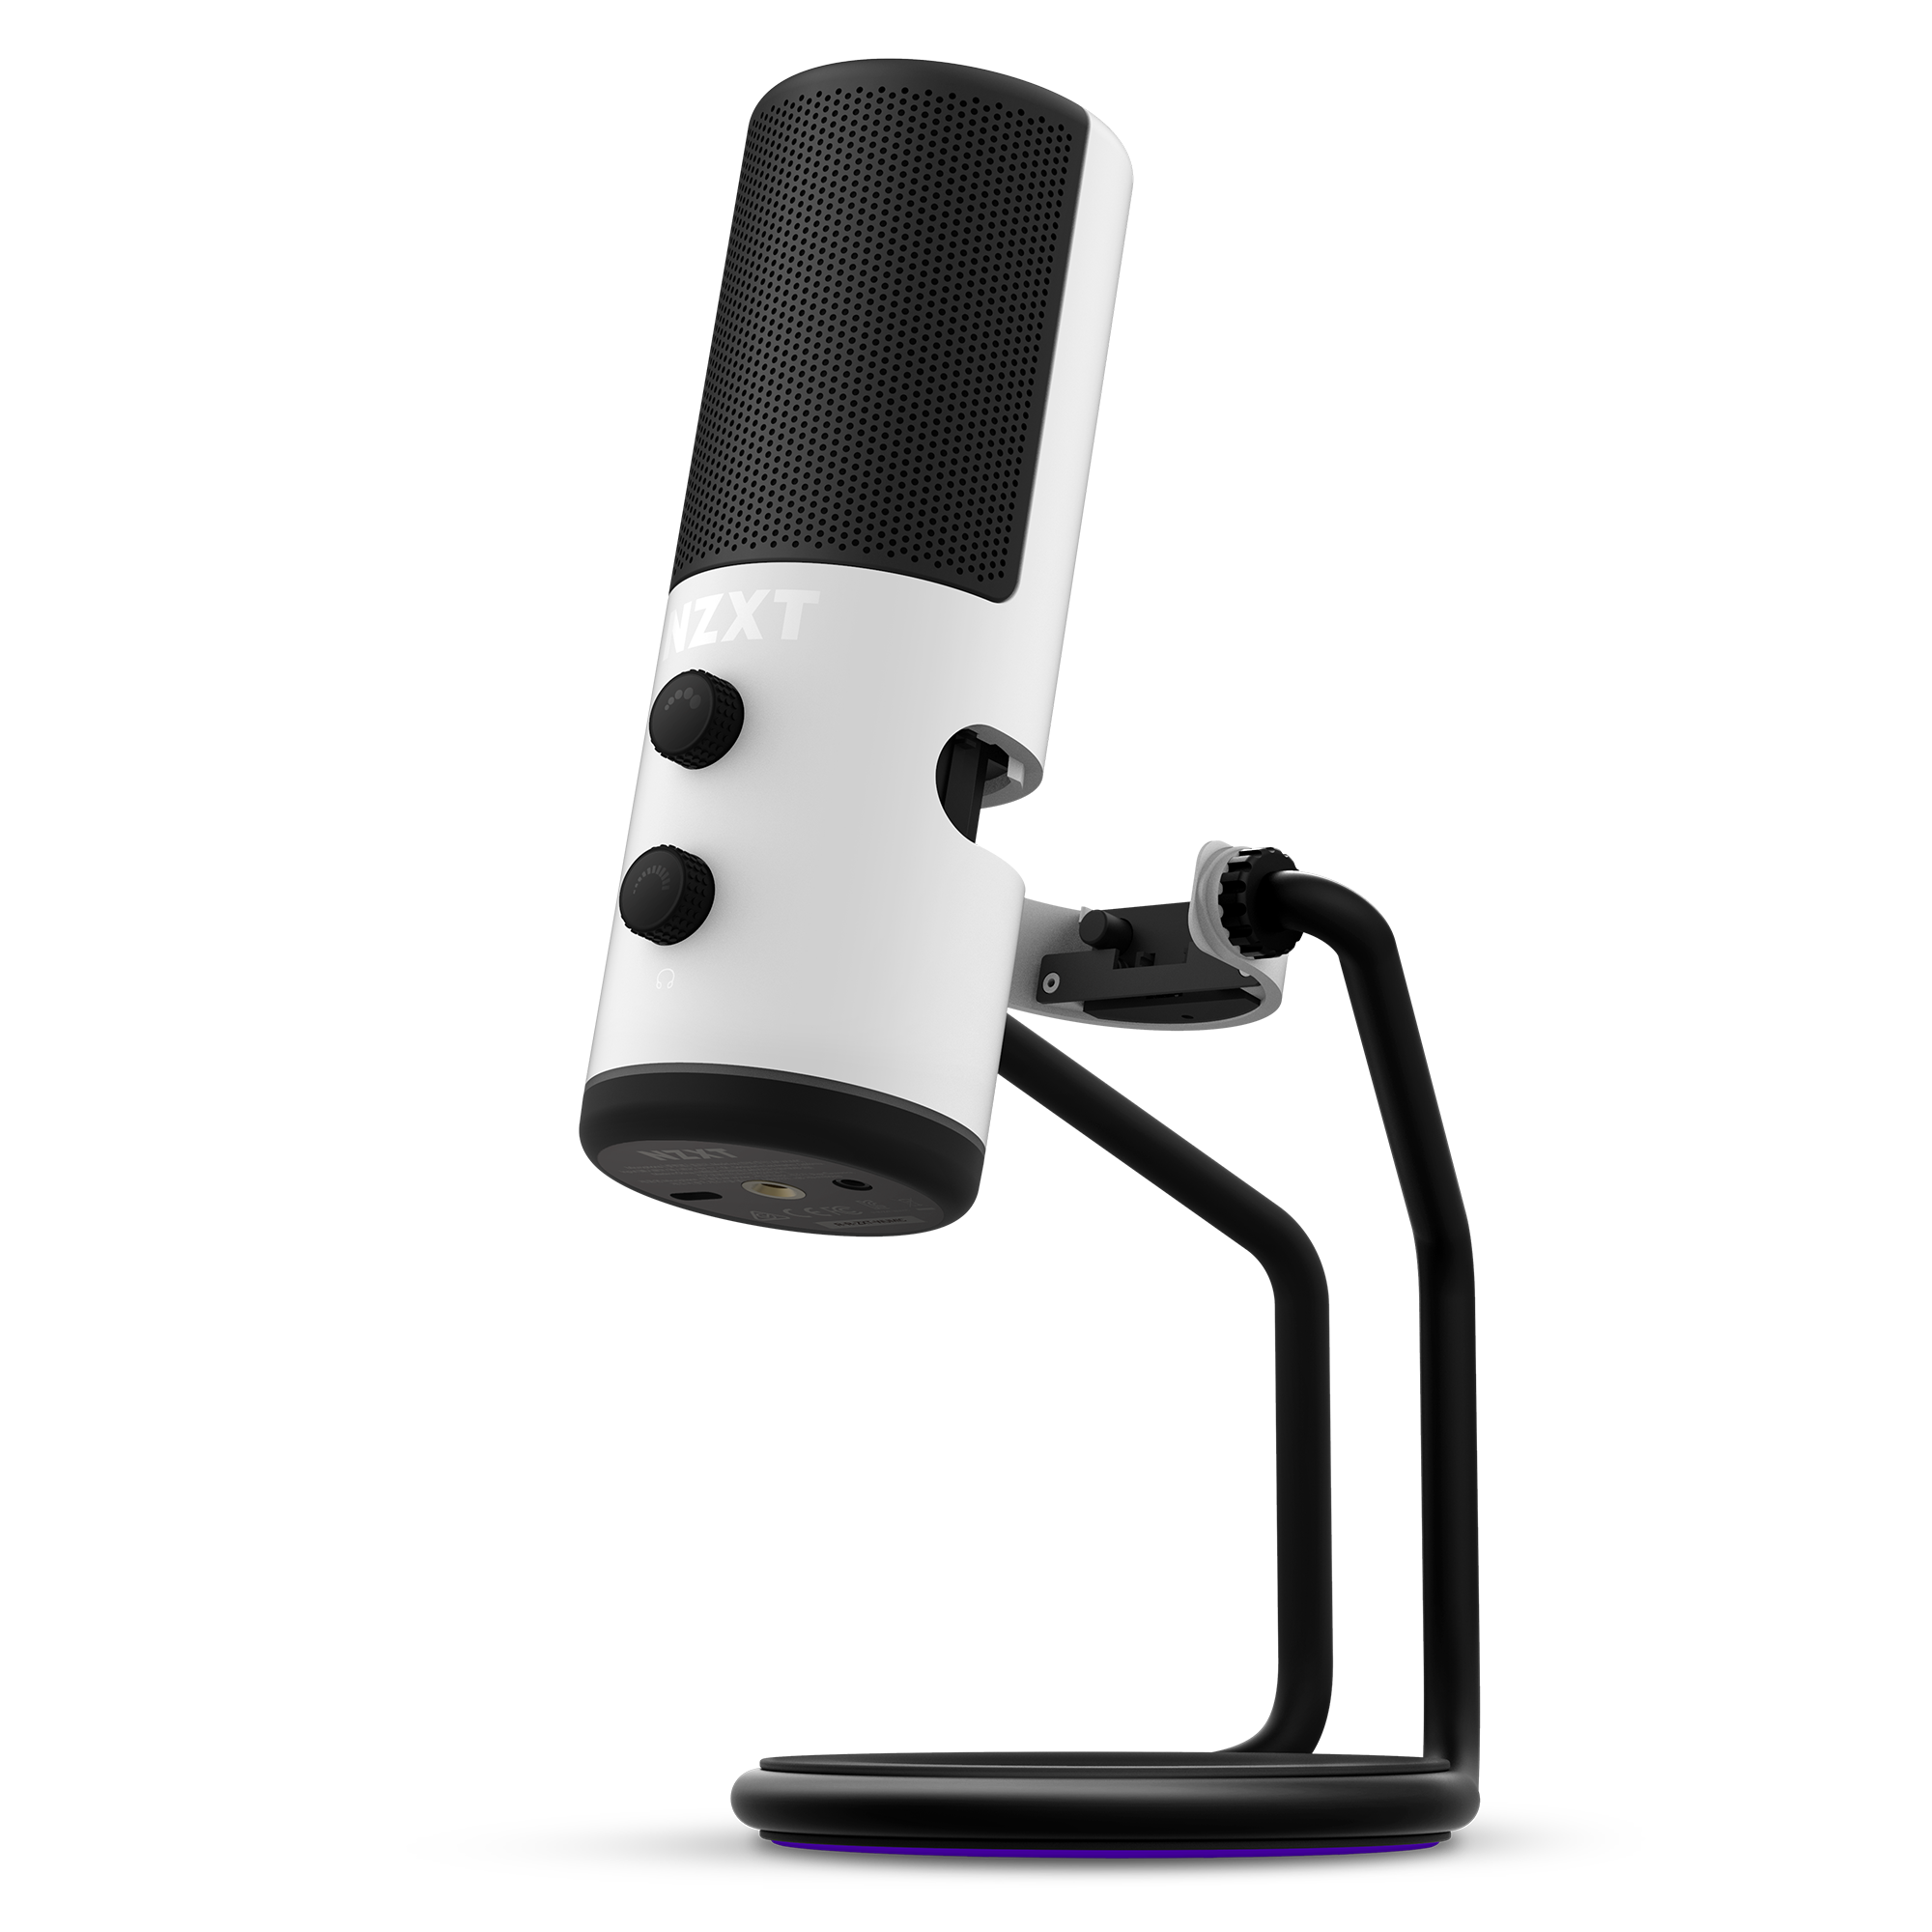 Best Cardioid USB Microphone for Gamers | Gaming PCs | NZXT